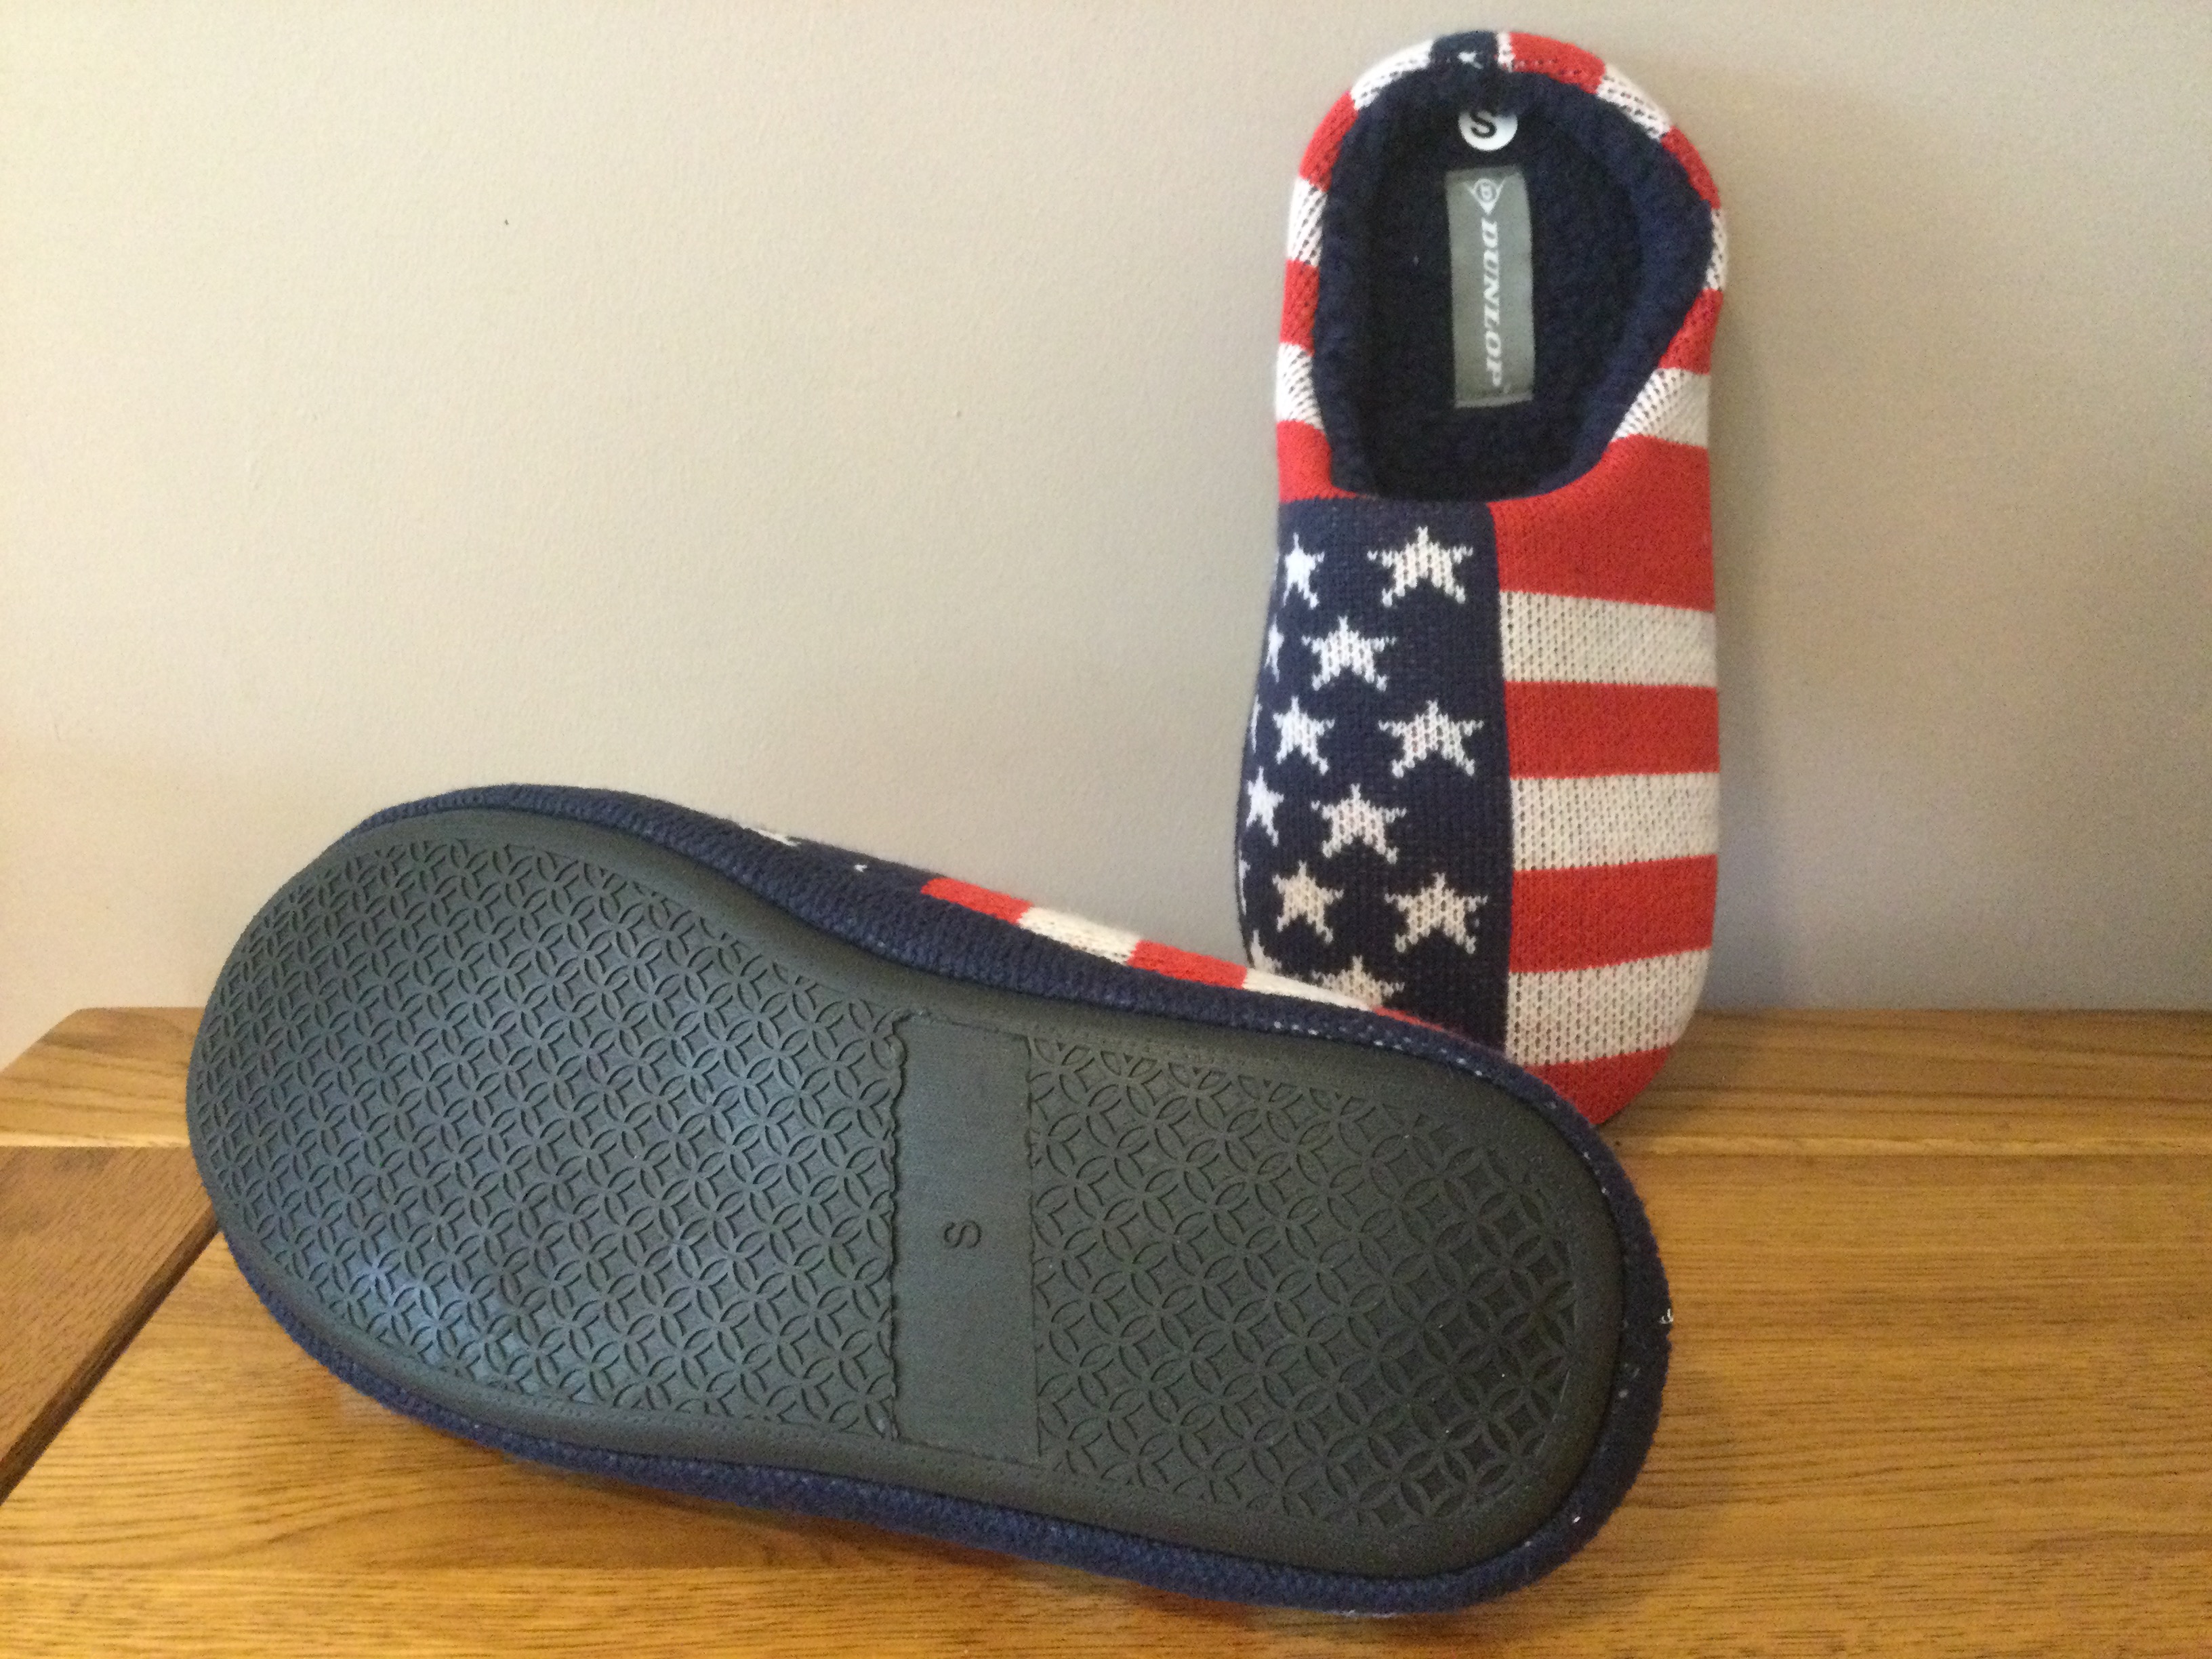 Mens Dunlop “USA Stars & Stripes” Memory Foam, Mule Slippers, Size S (6/7) - Image 2 of 4